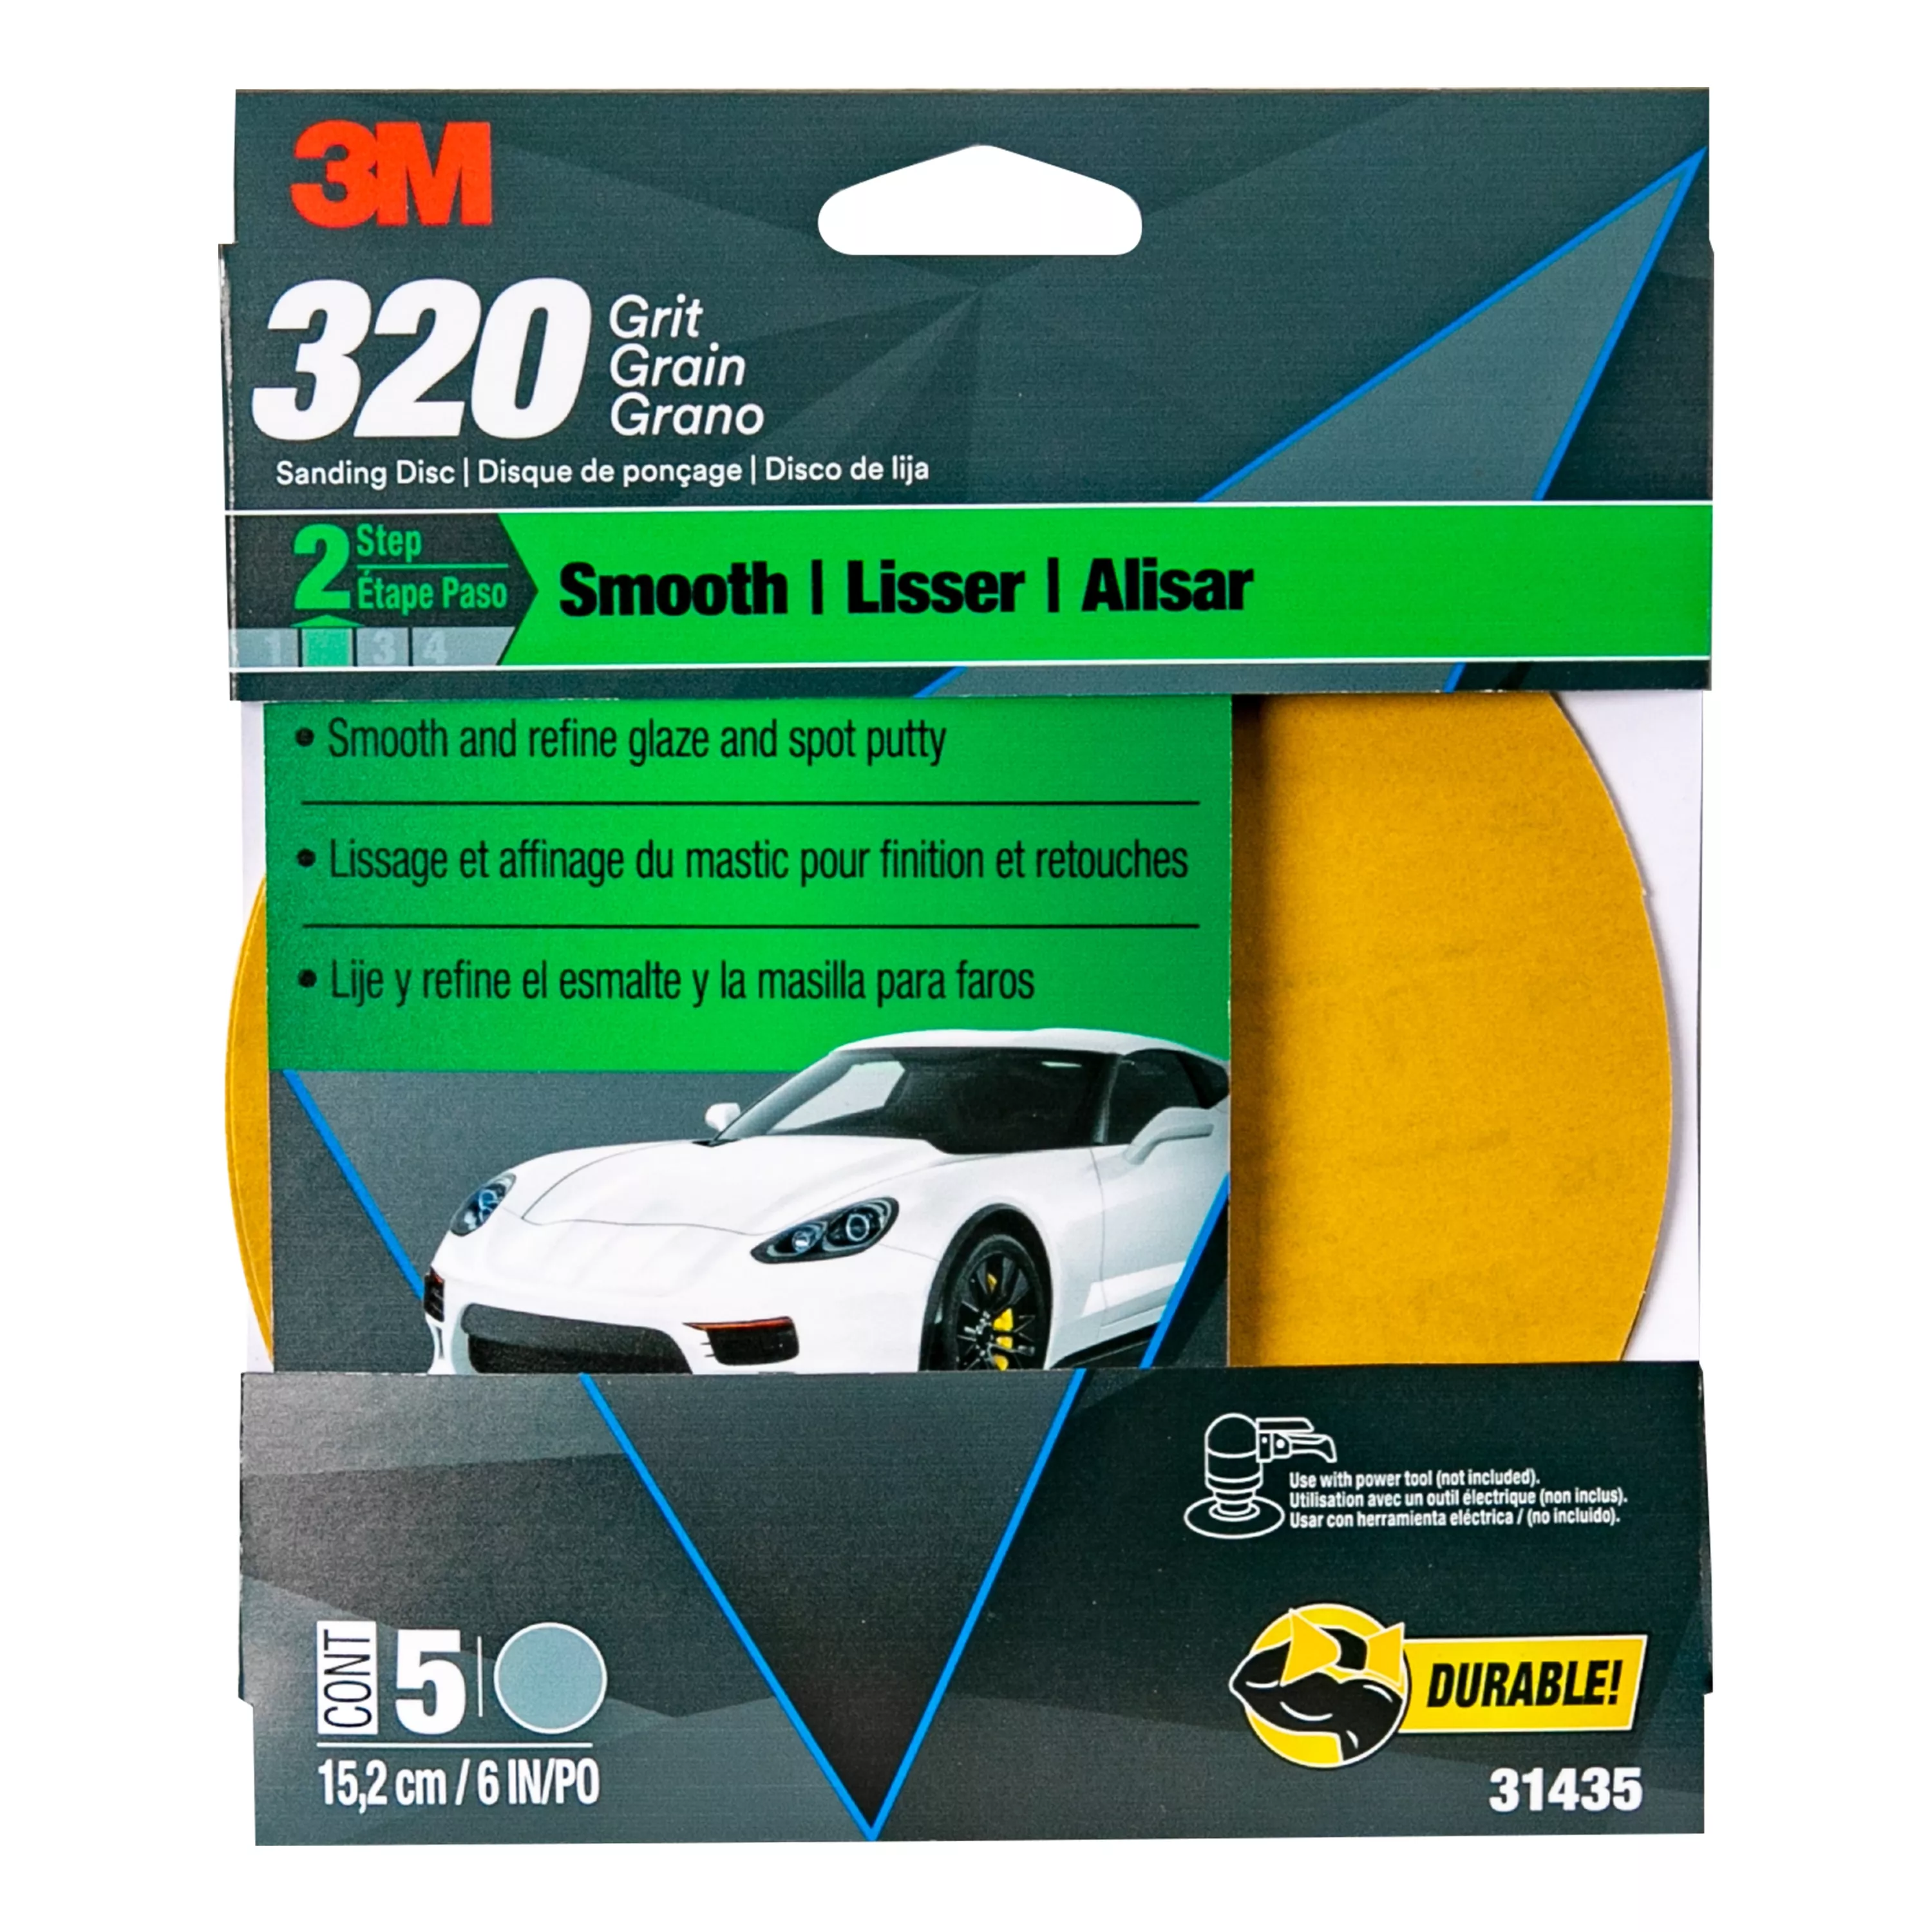 3M™ Sanding Discs with Stikit™ Attachment, 31435, 6 in, 320 Grit, 5
discs per pack, 4 packs per case